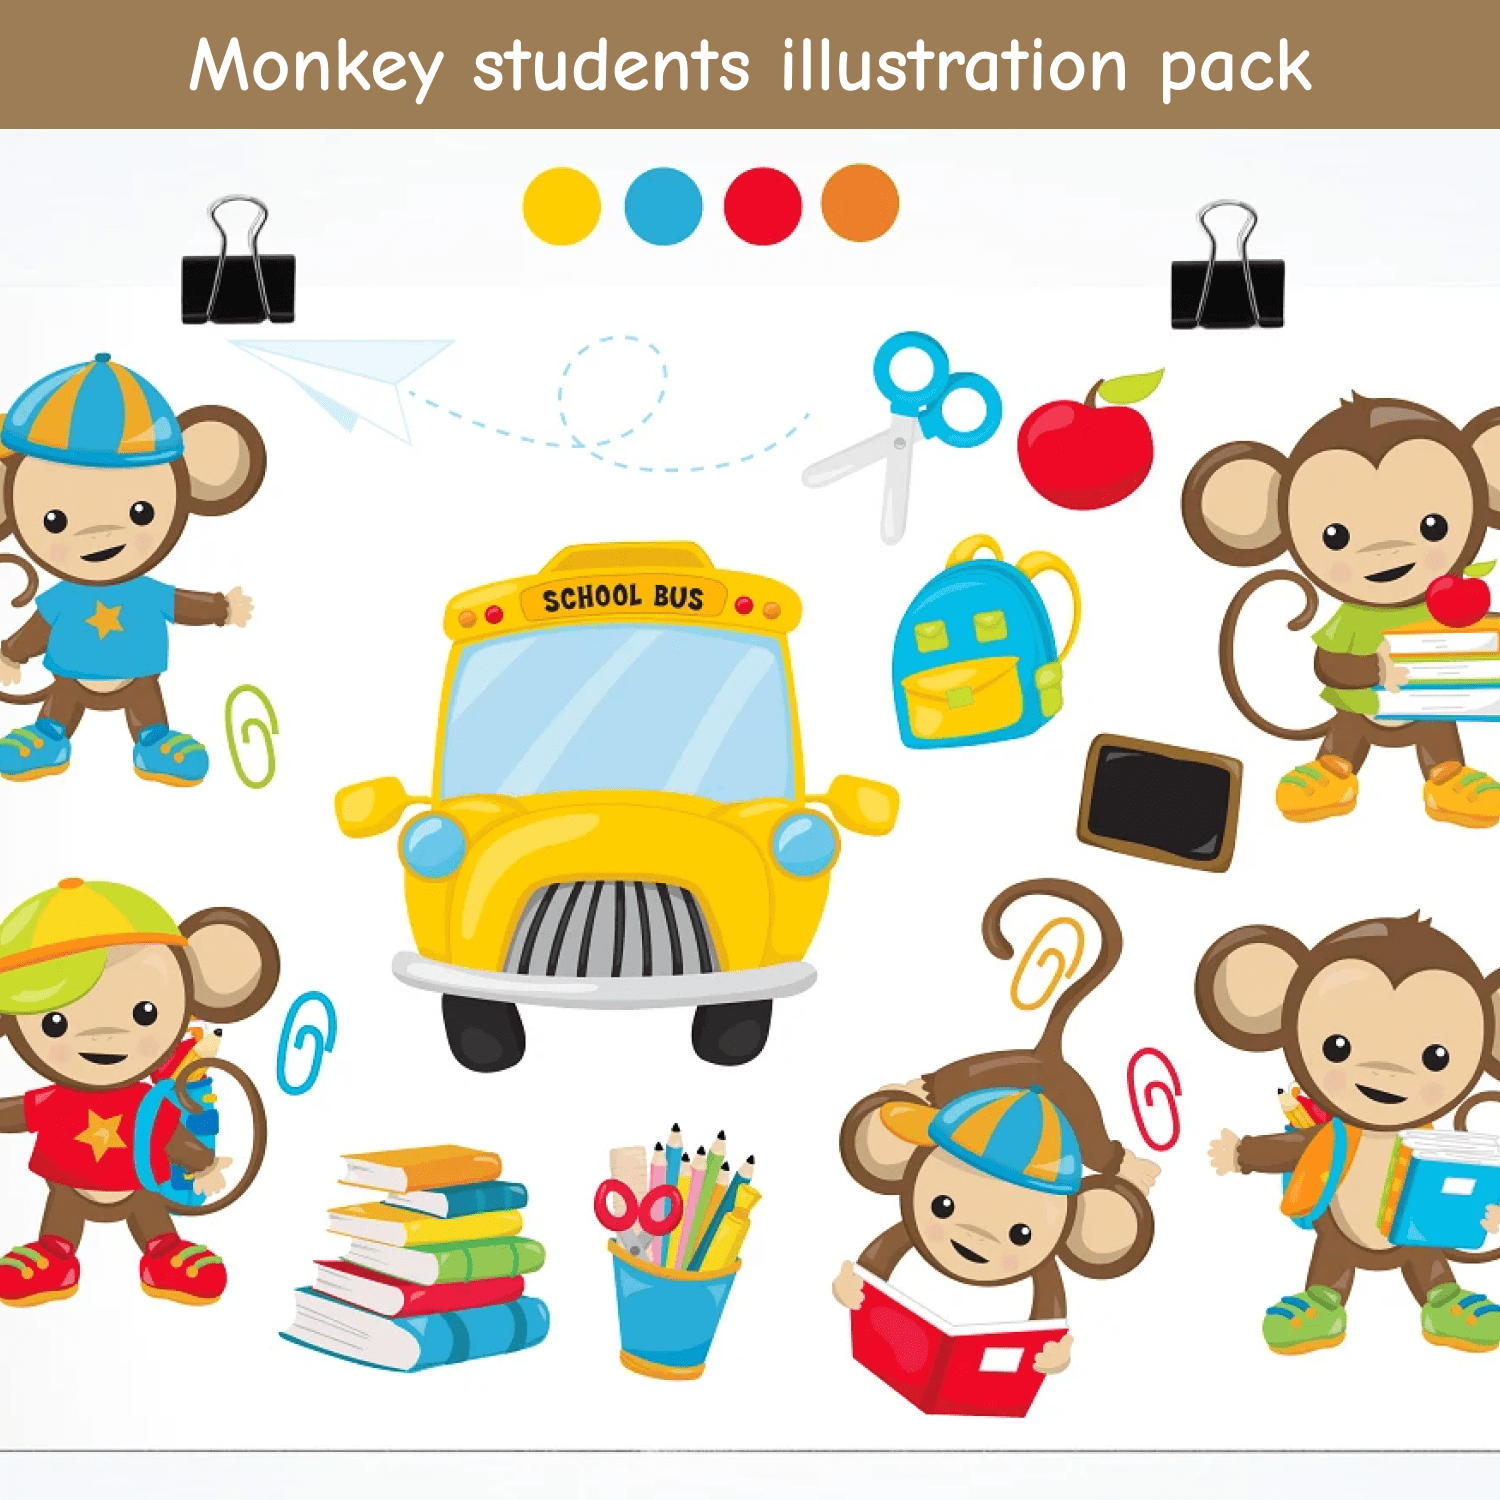 Monkey students illustration pack cover.